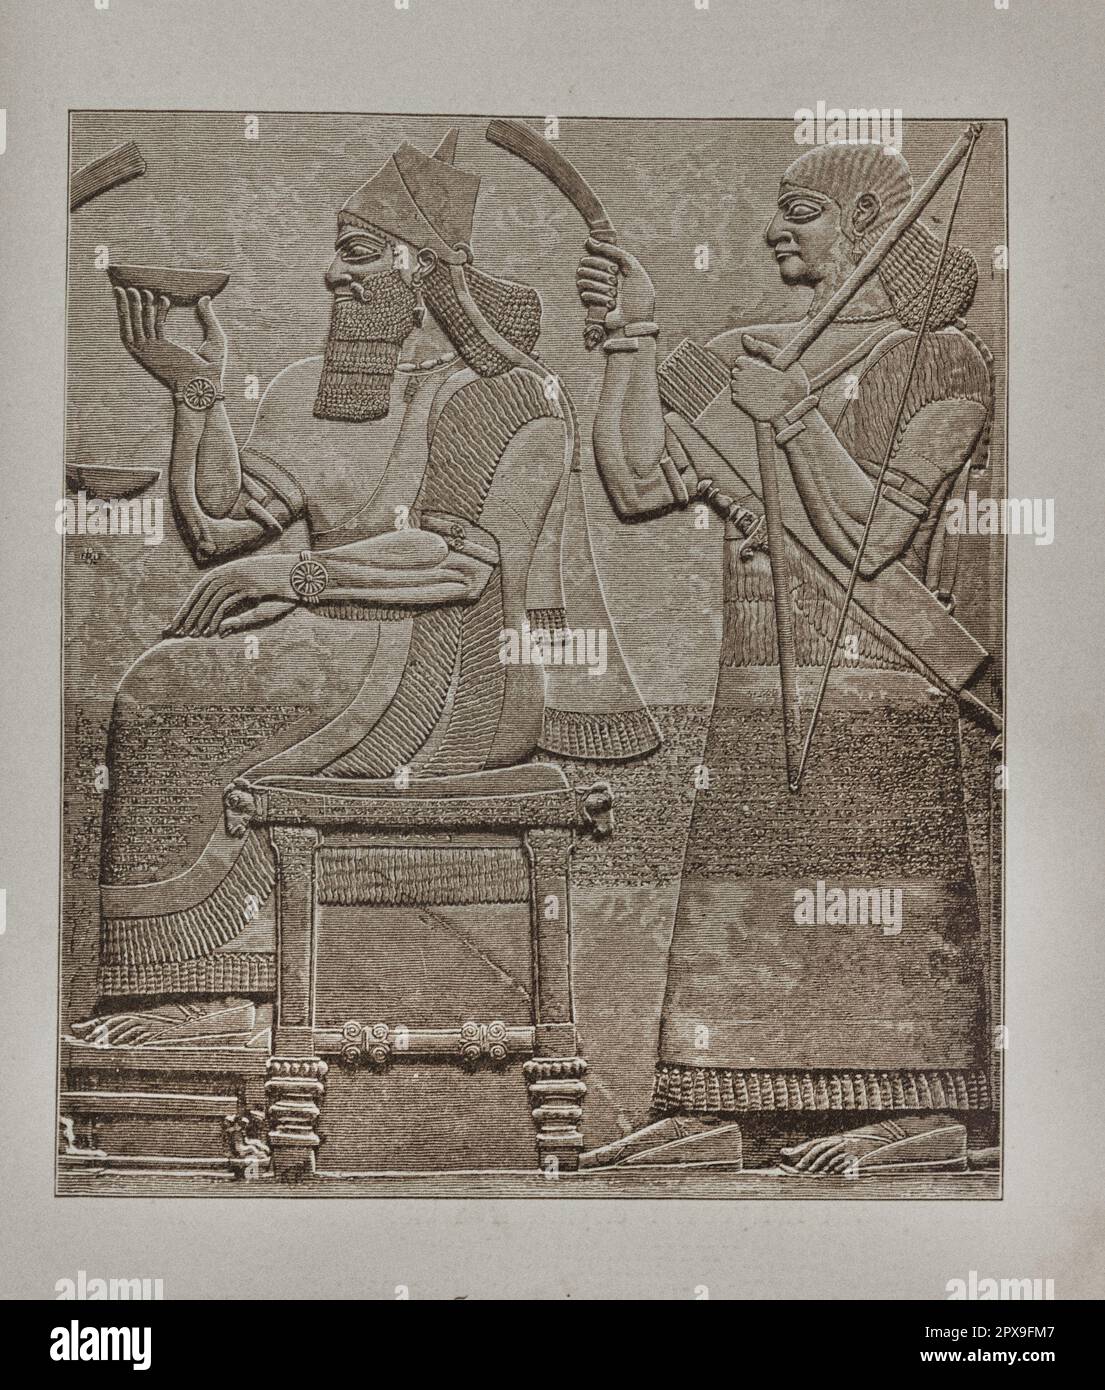 Vintage illustration of a king on the throne. Assyrian bas-relief. Stock Photo